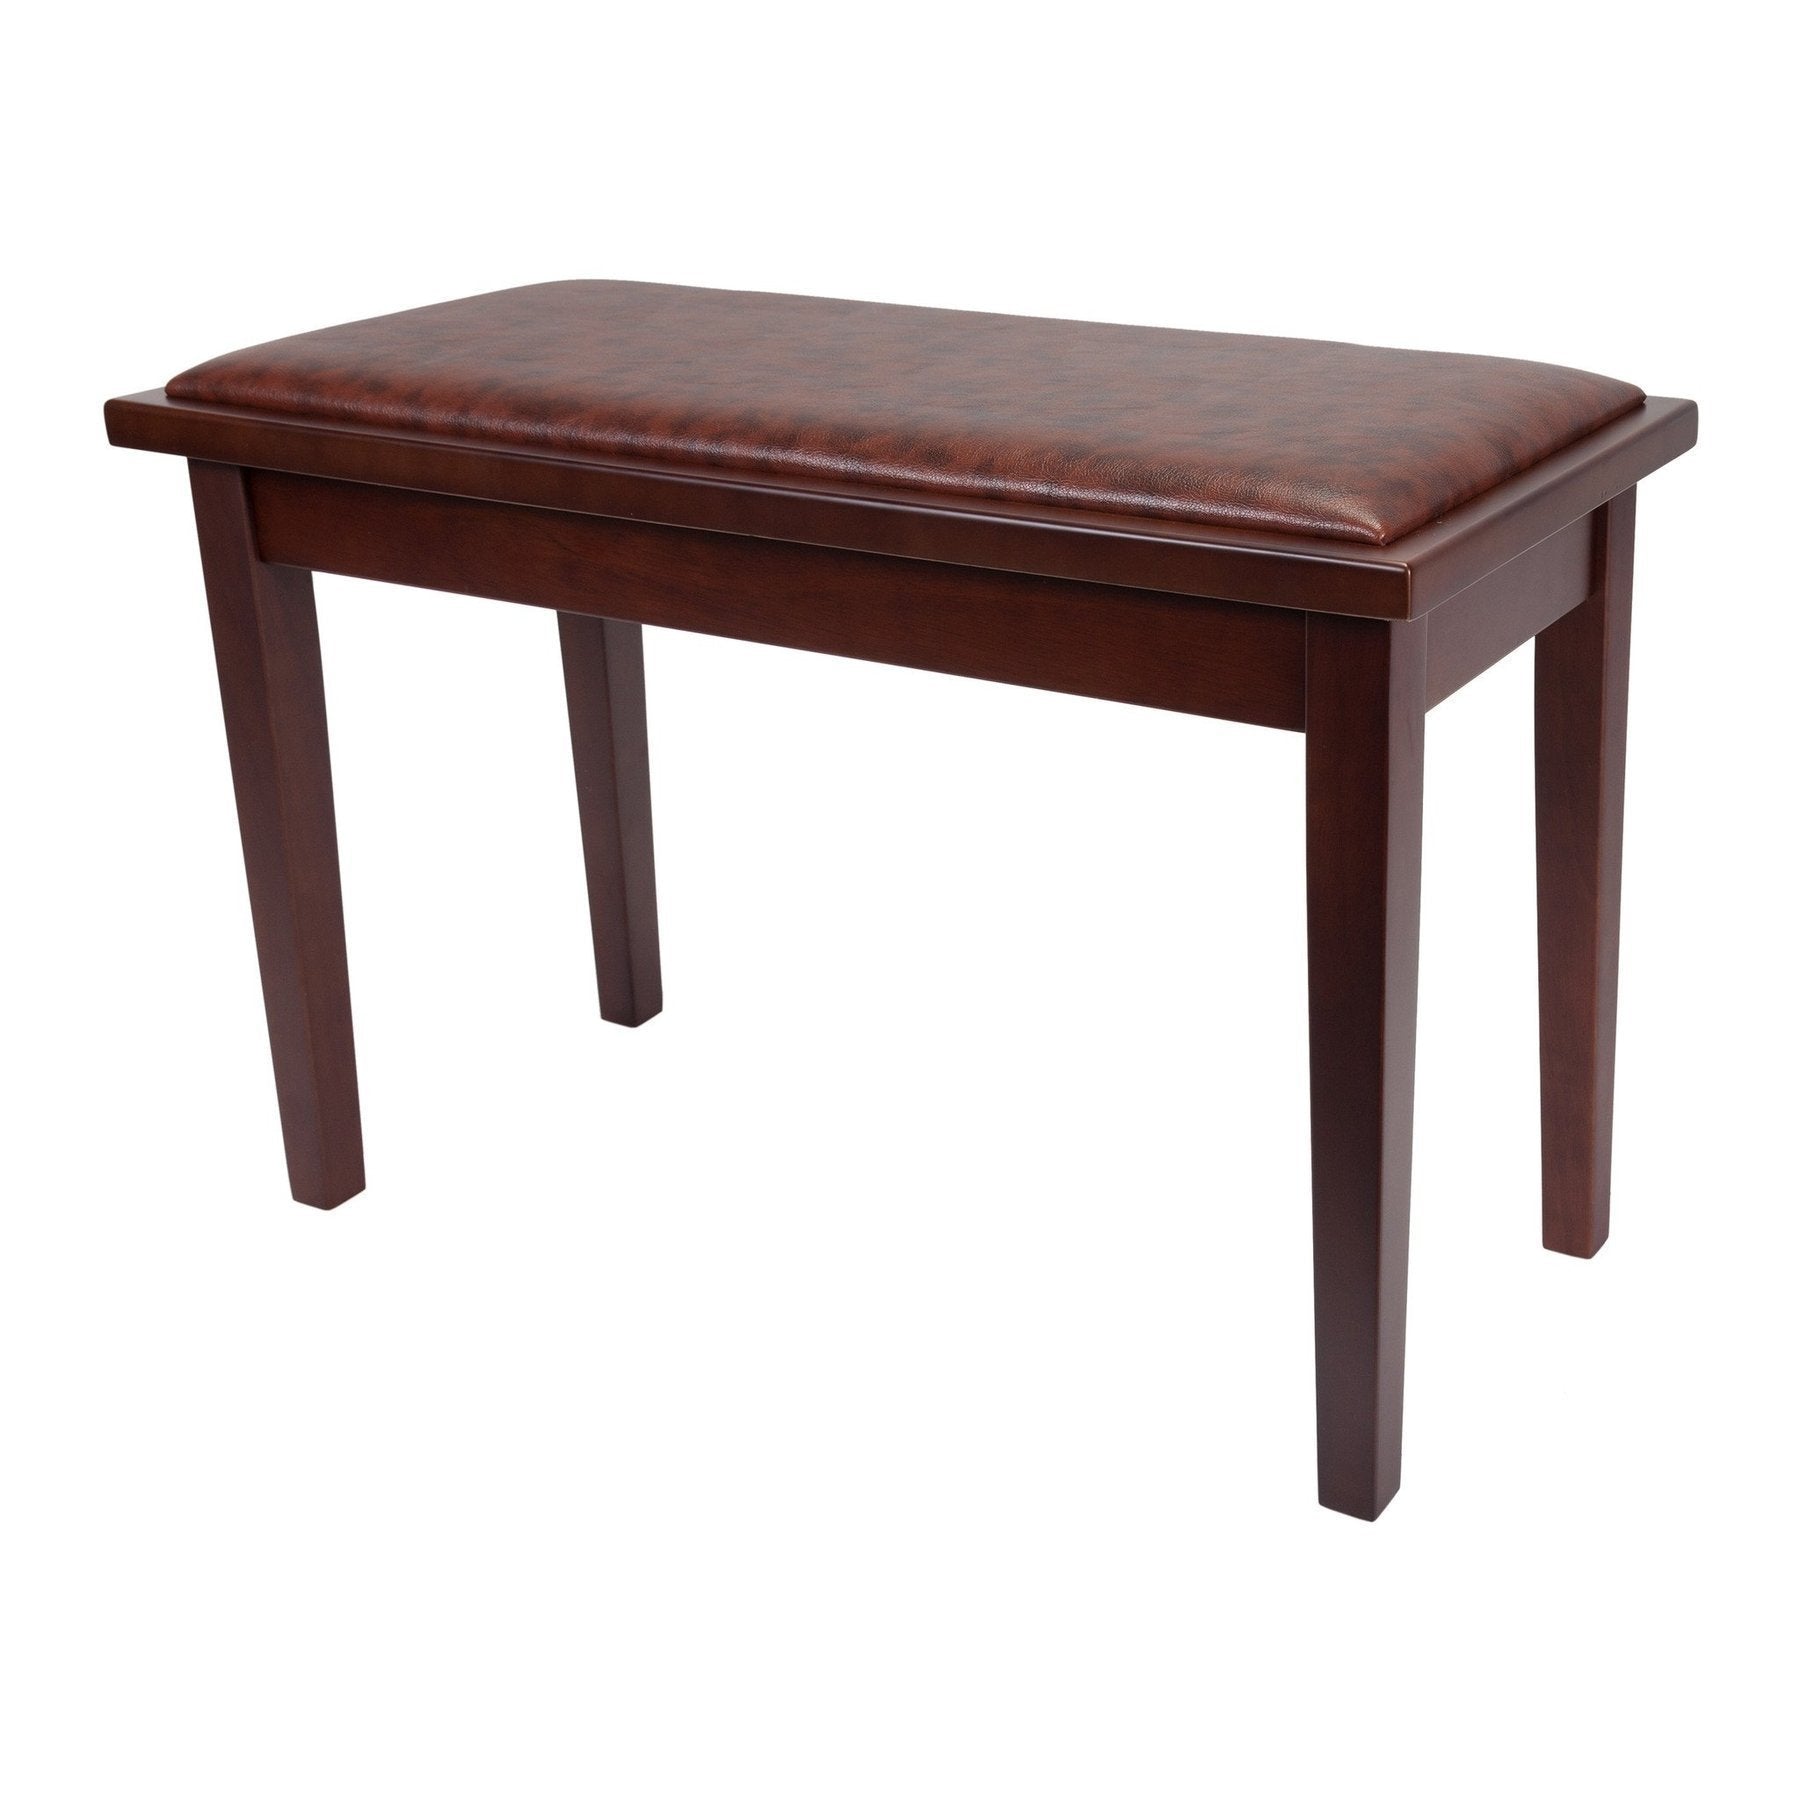 Crown Deluxe Timber Trim Duet Piano Stool with Storage Compartment (Walnut)-CPS-1-WAL